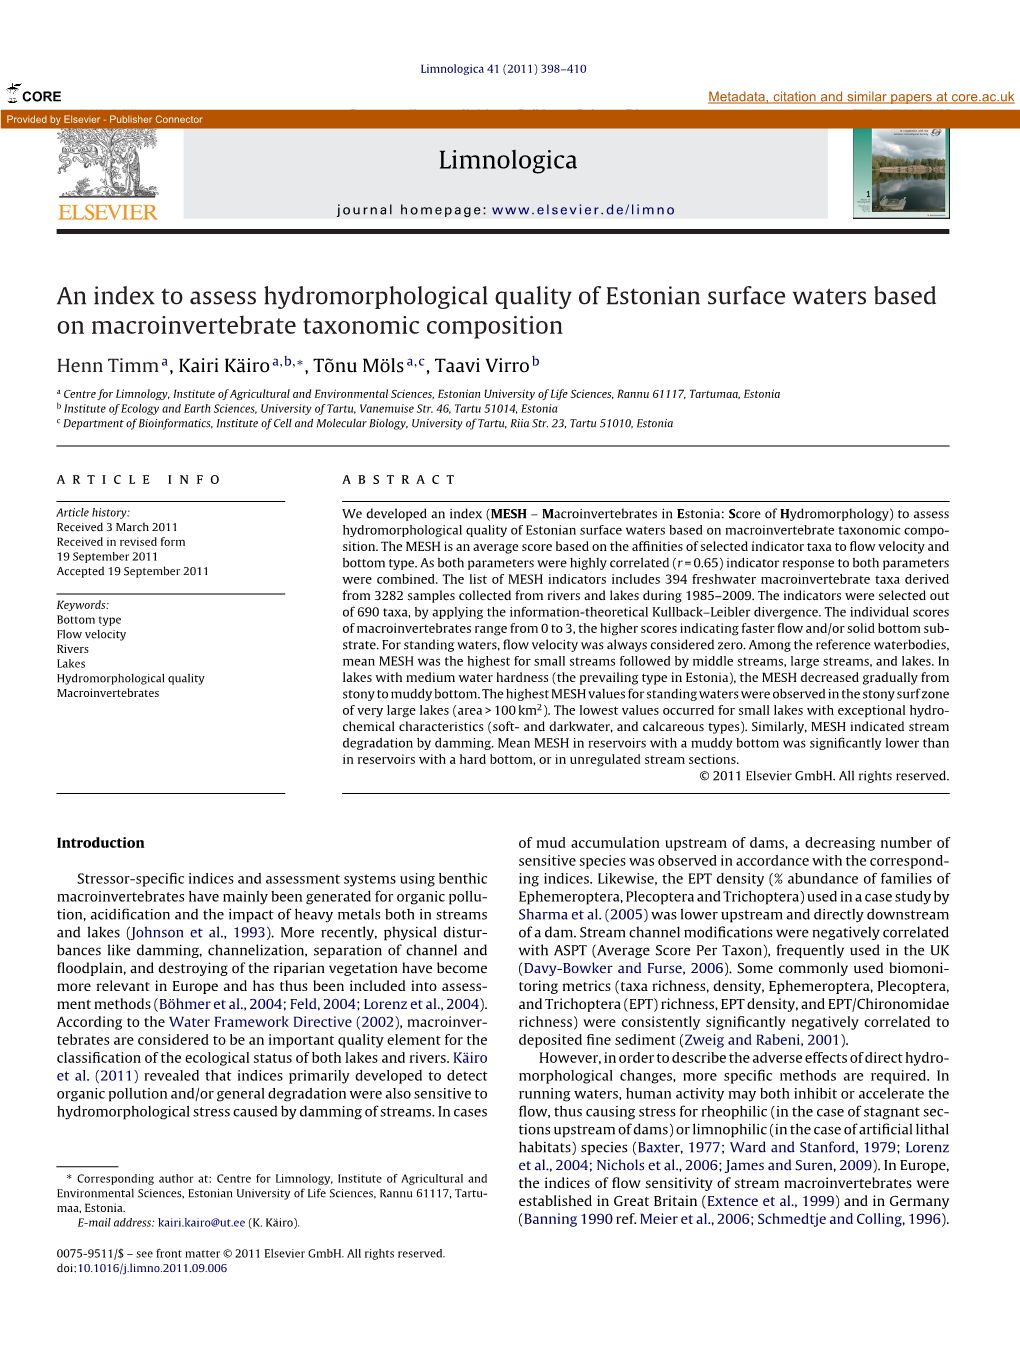 An Index to Assess Hydromorphological Quality of Estonian Surface Waters Based